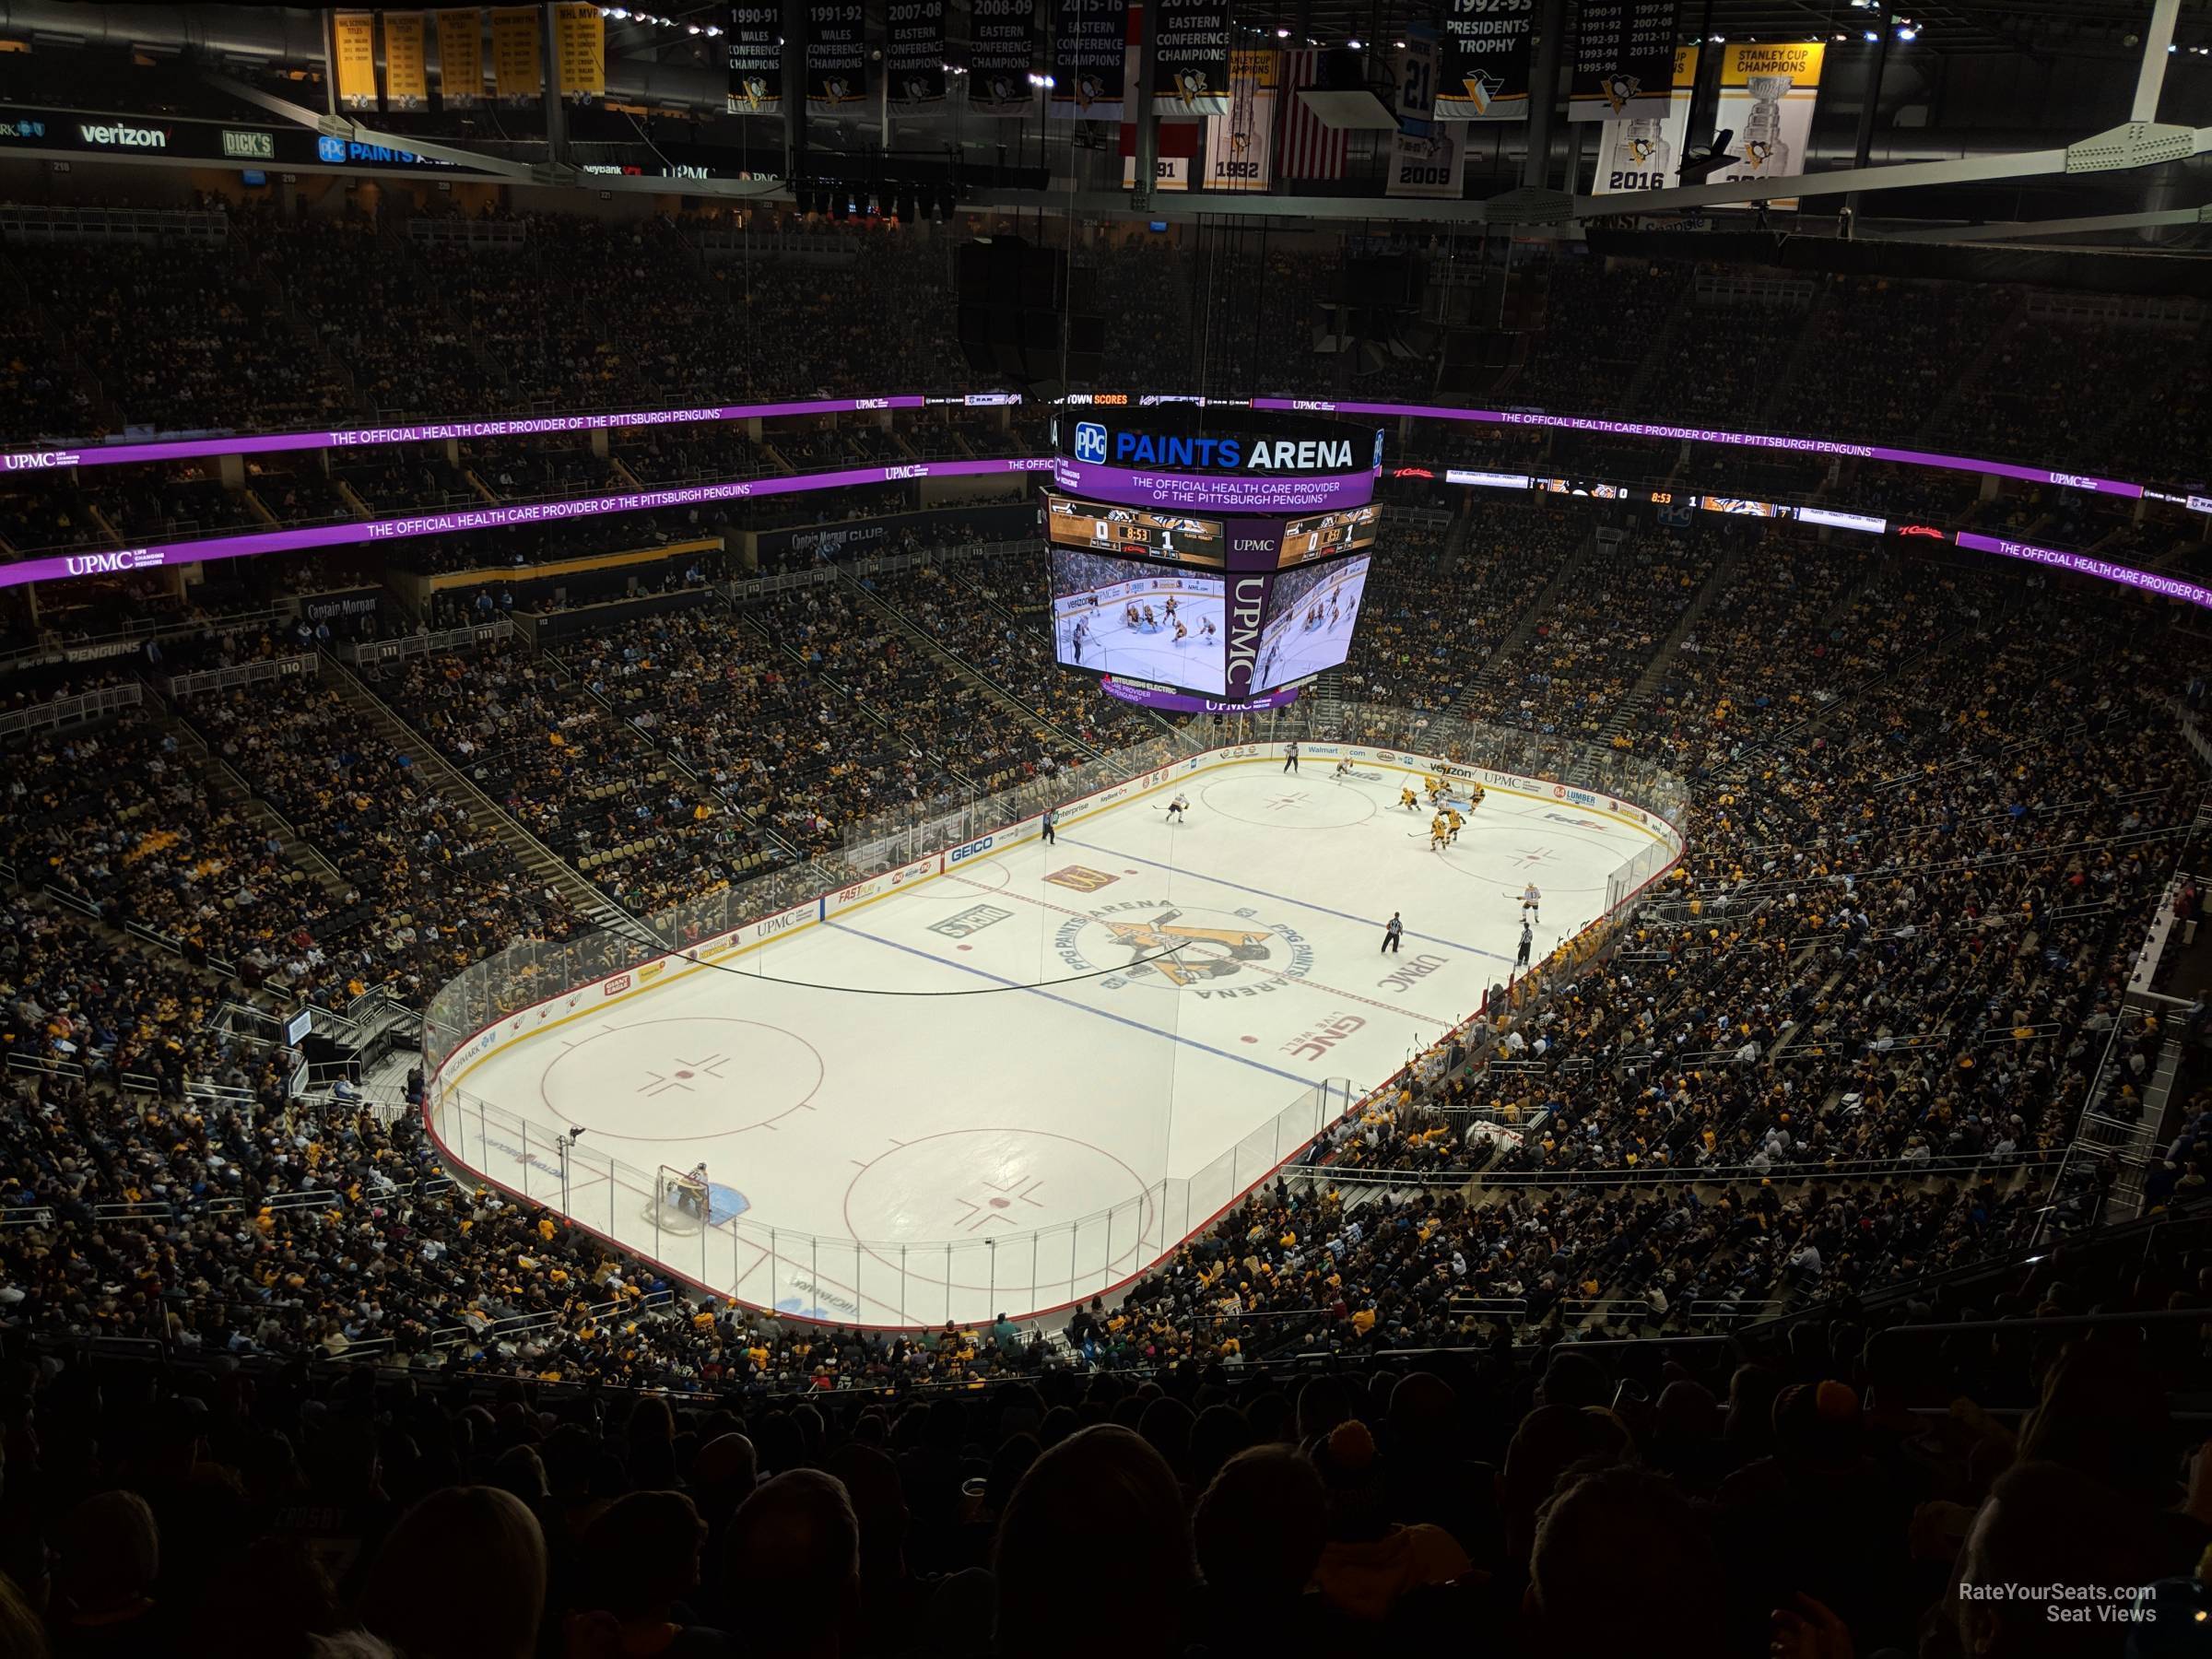 section 208, row edg seat view  for hockey - ppg paints arena